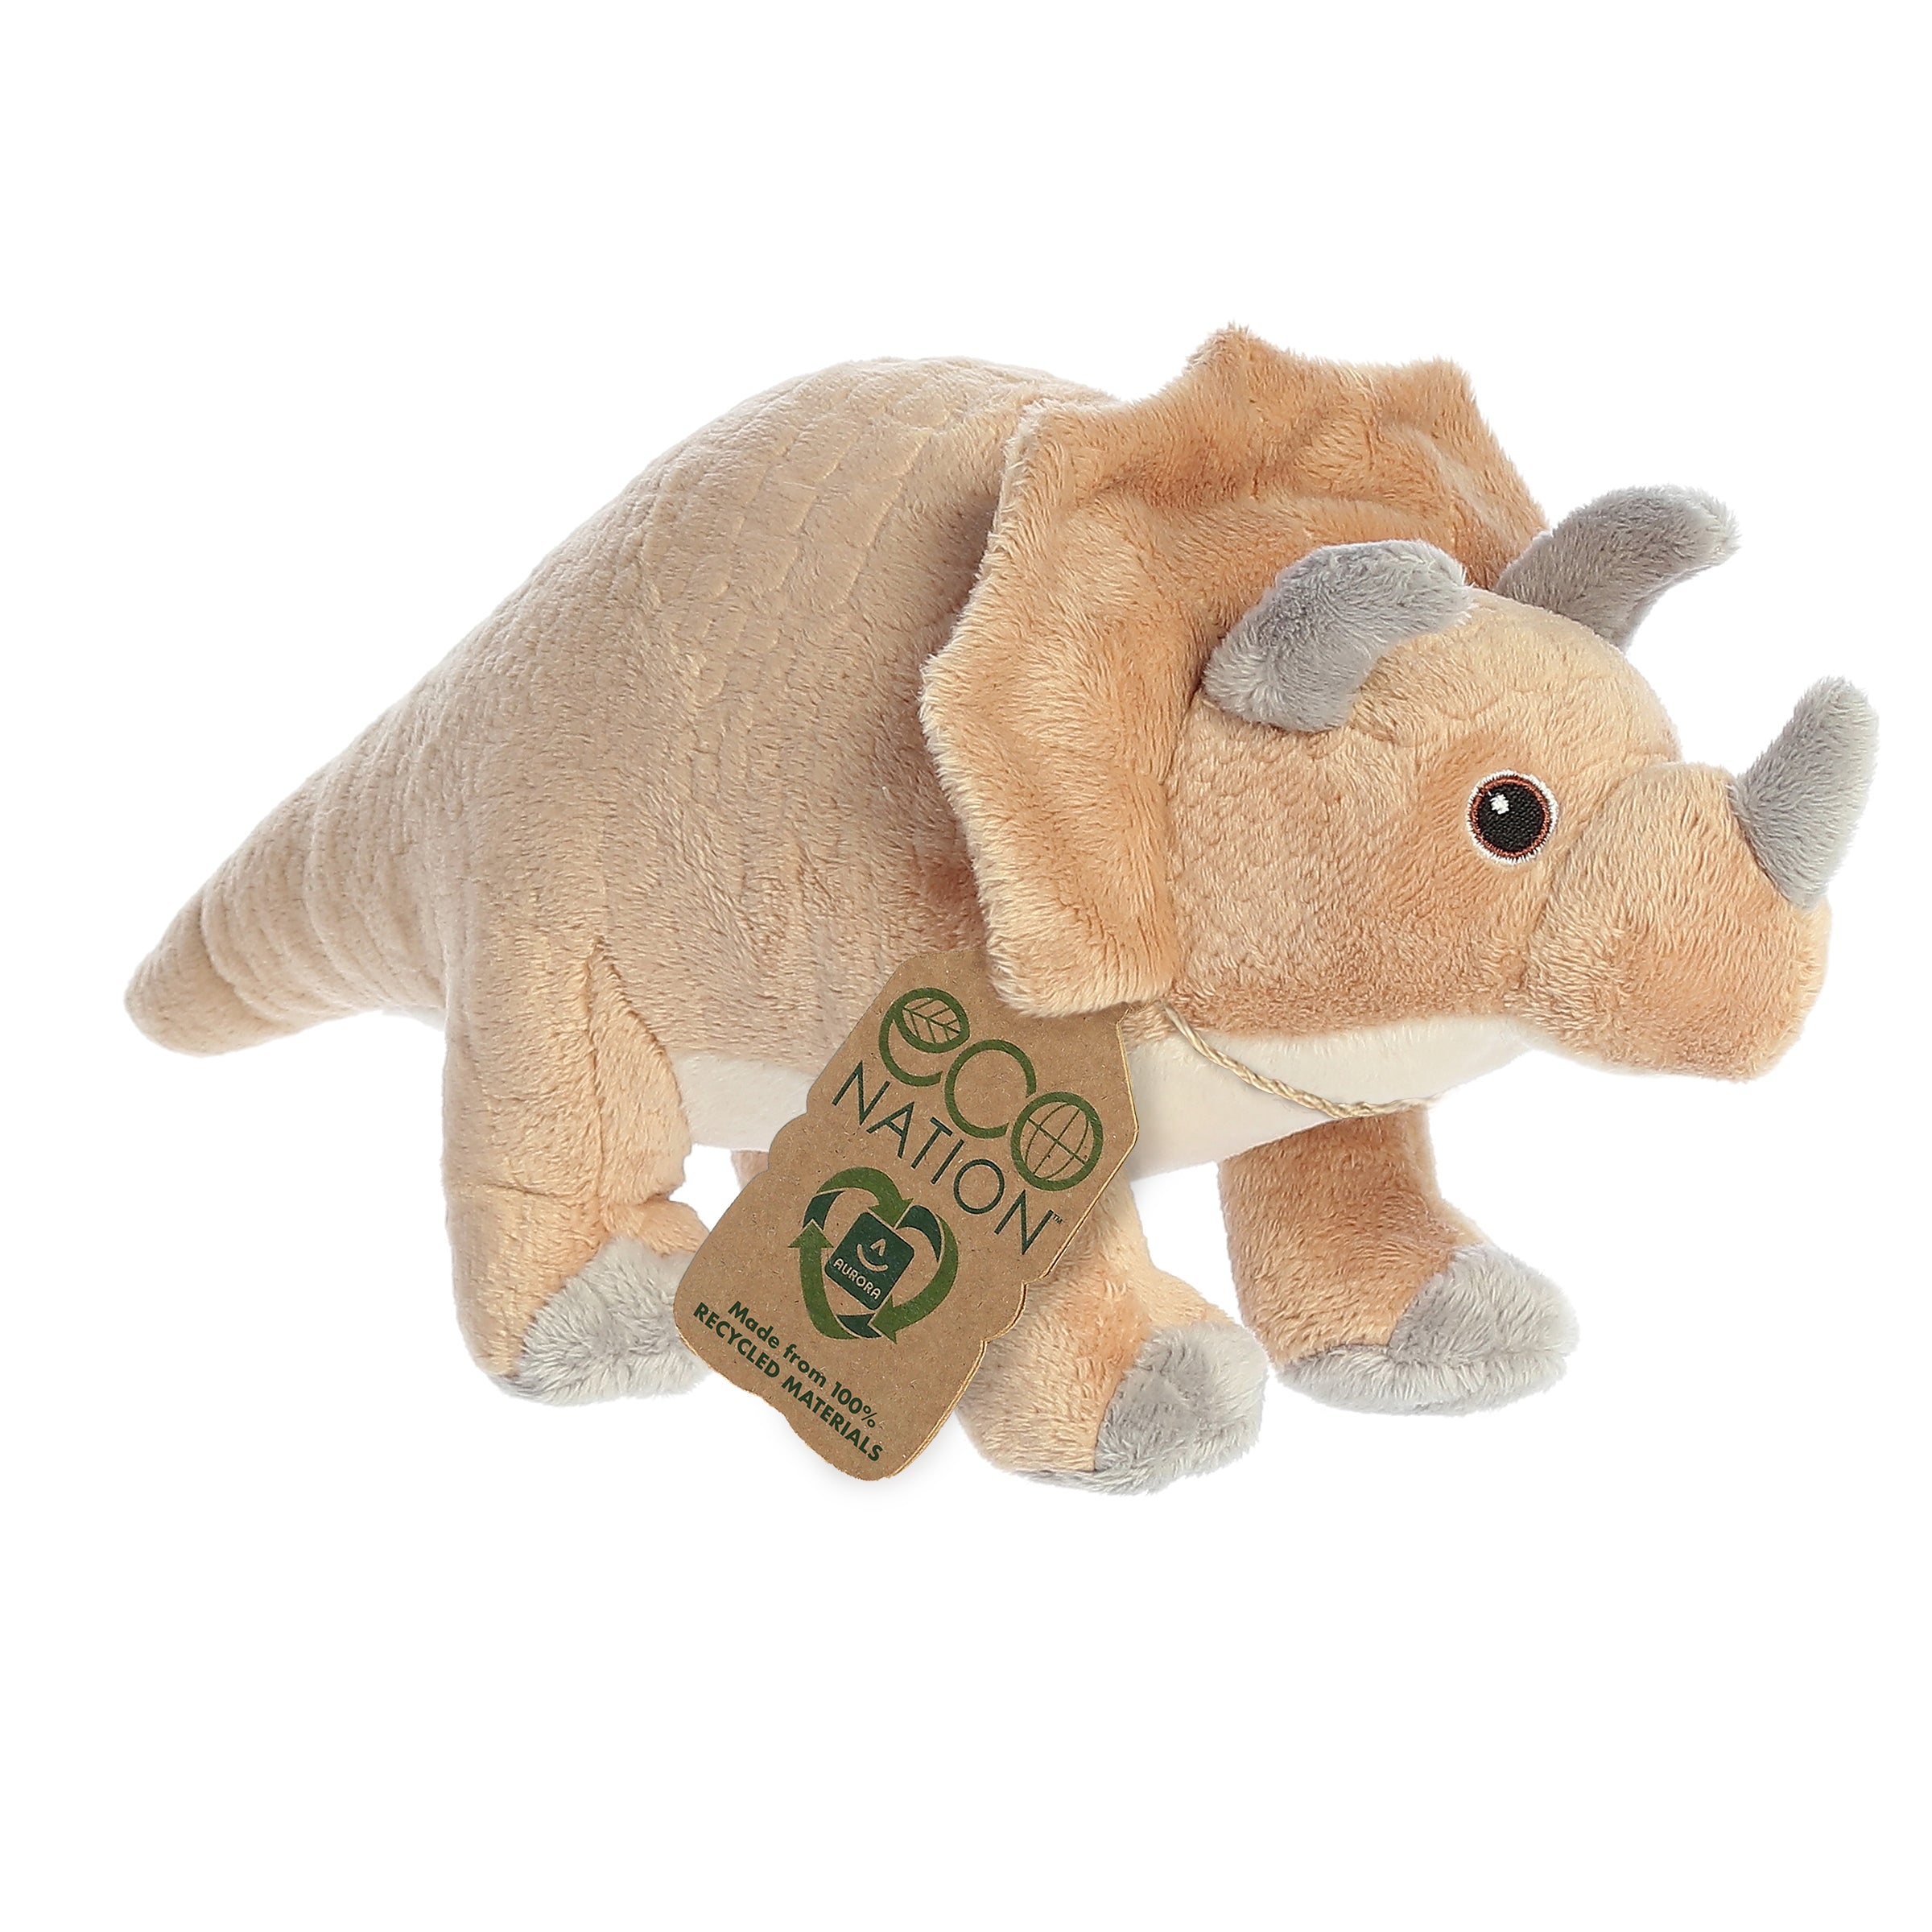 A sweet triceratops plush with three soft grey horns and a tan body, embroidered eyes, and an eco-nation tag